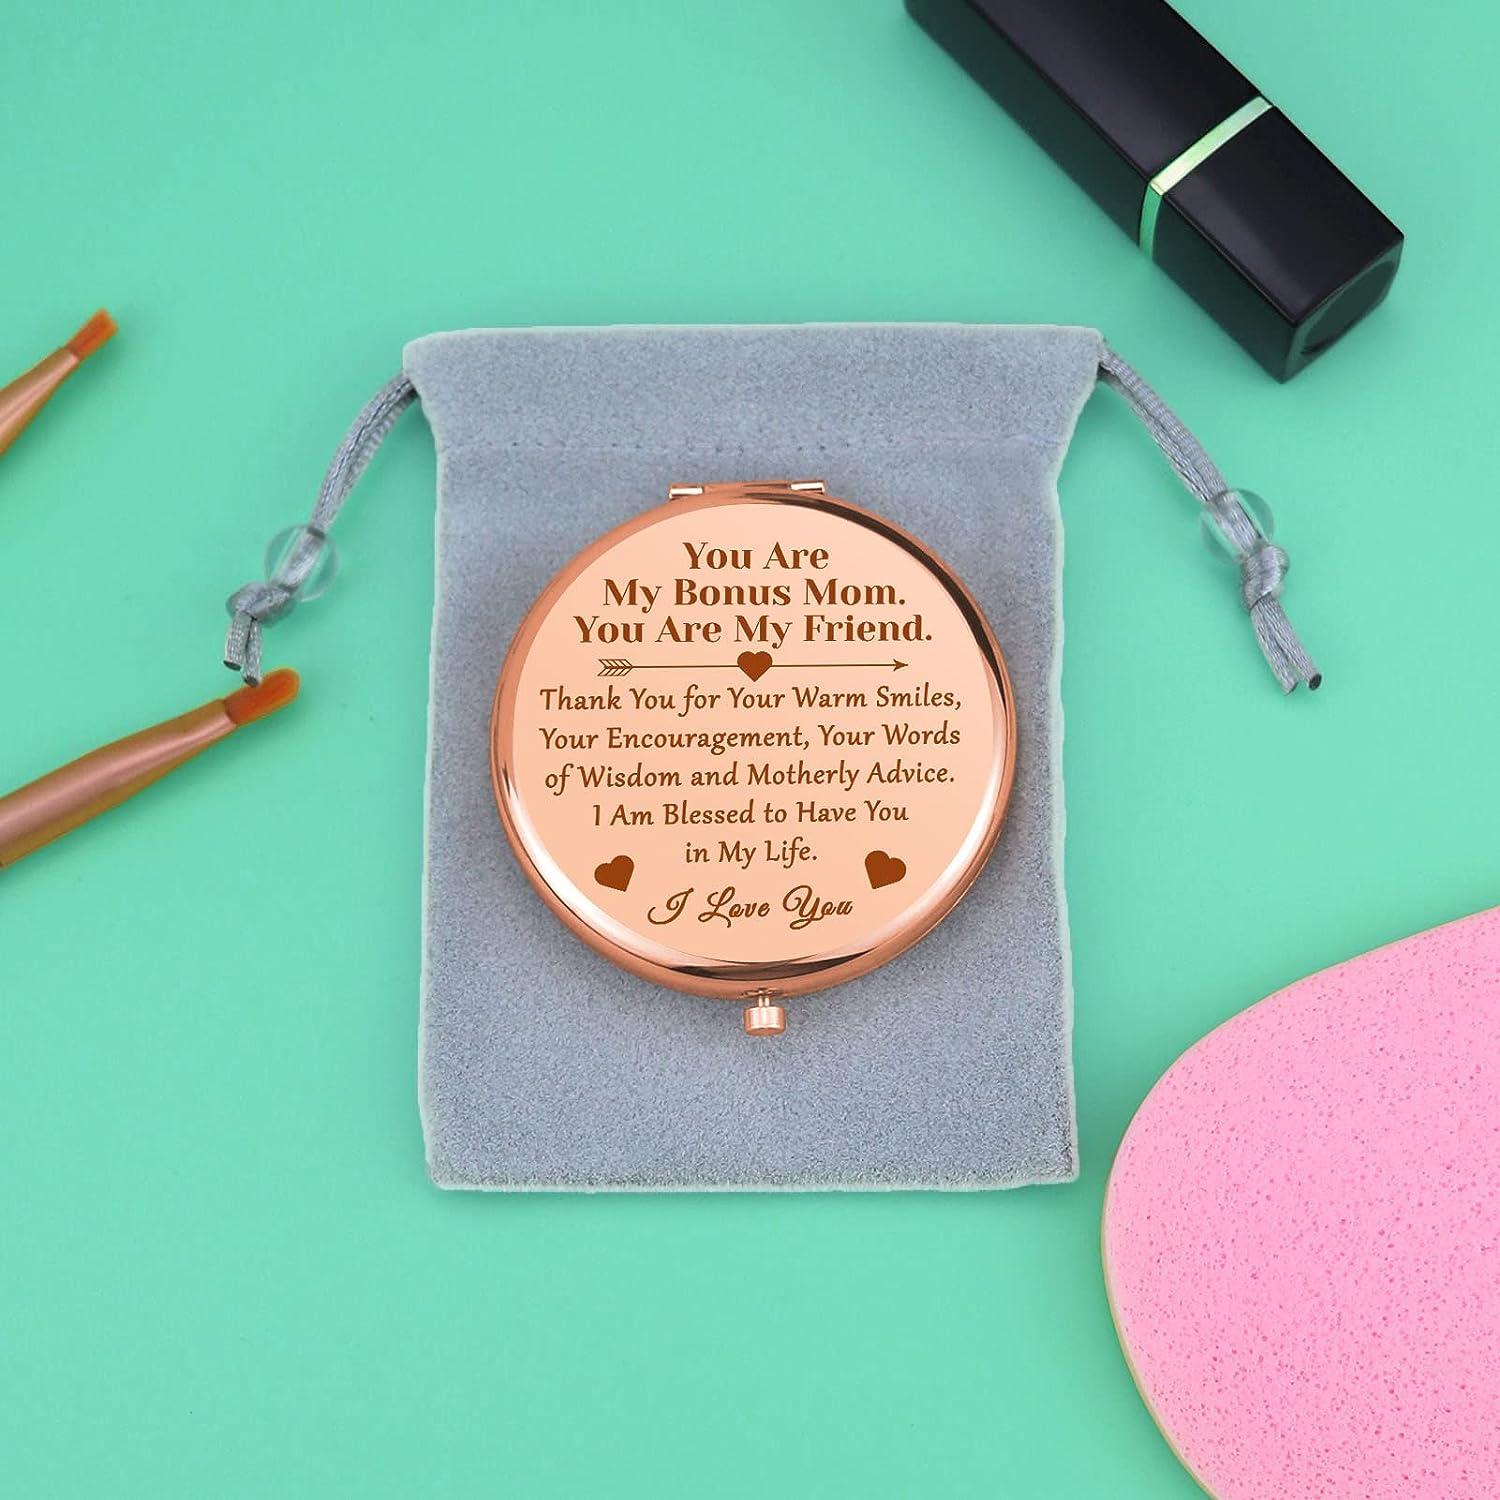 Gifts for Mom from Daughter Son Mothers Day Birthday Gifts for Mom- I Love  You Mom Rose Gold Compact Mirror Unique Mom Gifts for Mother Stepmom Women  Mothers Day Christmas Valentines Day